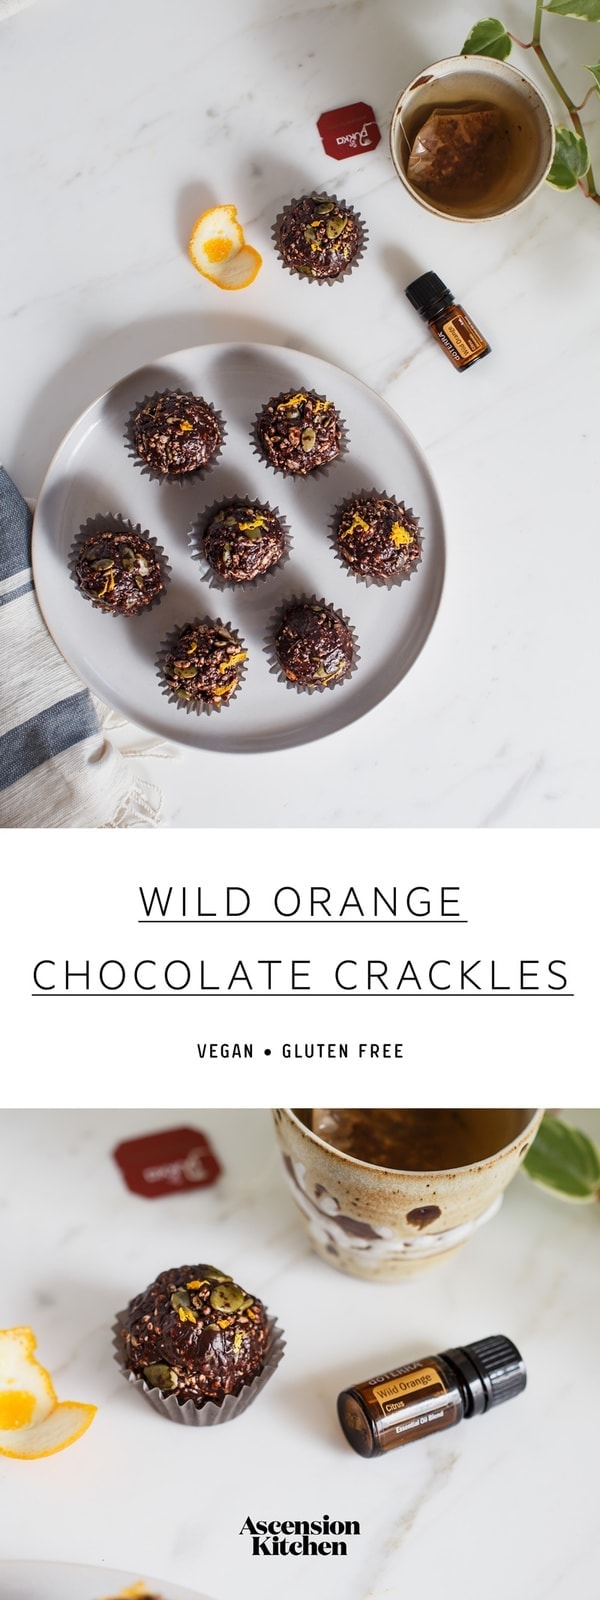 A simple recipe for chocolate crackles infused with wild orange essential oil. #chocolatecrackles #chocolatetruffles #essentialoilrecipes #wildorange #doterrarecipes #vegantruffles #easytreats #healthytreats #quickdesserts #healthydesserts #sweetrecipes #sweetideas #AscensionKitchen // Pin to your own inspiration board! //